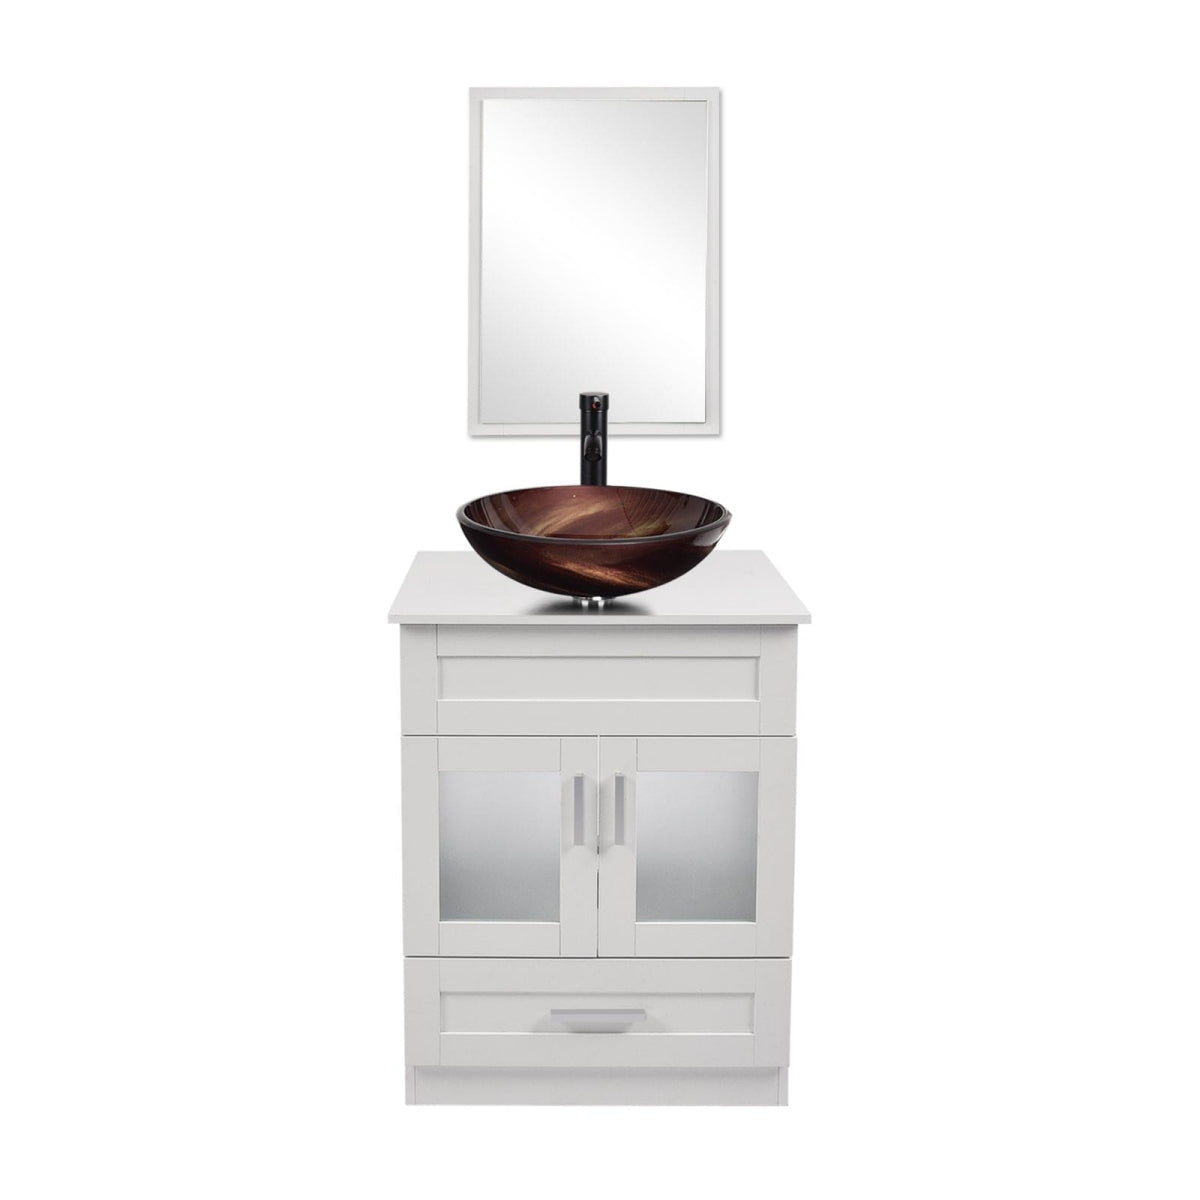 Elecwish White Bathroom Vanity with Flame Red Round Sink Set BA1001-WH